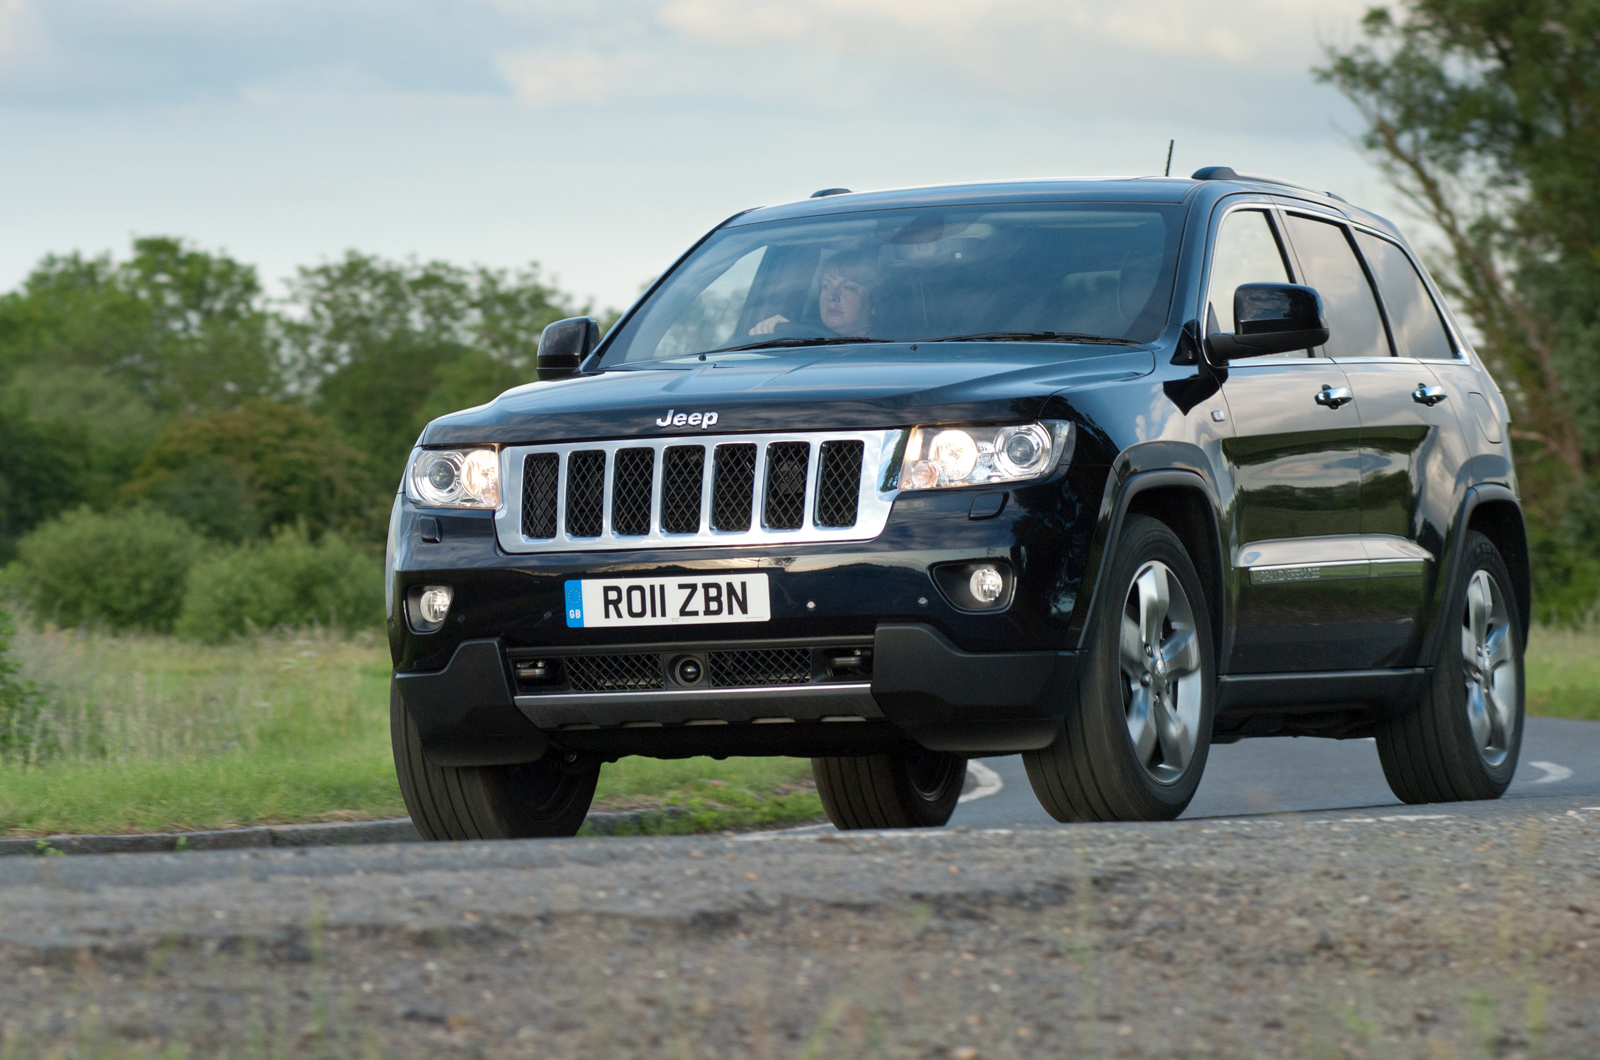 Jeep Grand Cherokee 3.0 V6 CRD 2012 review Autocar